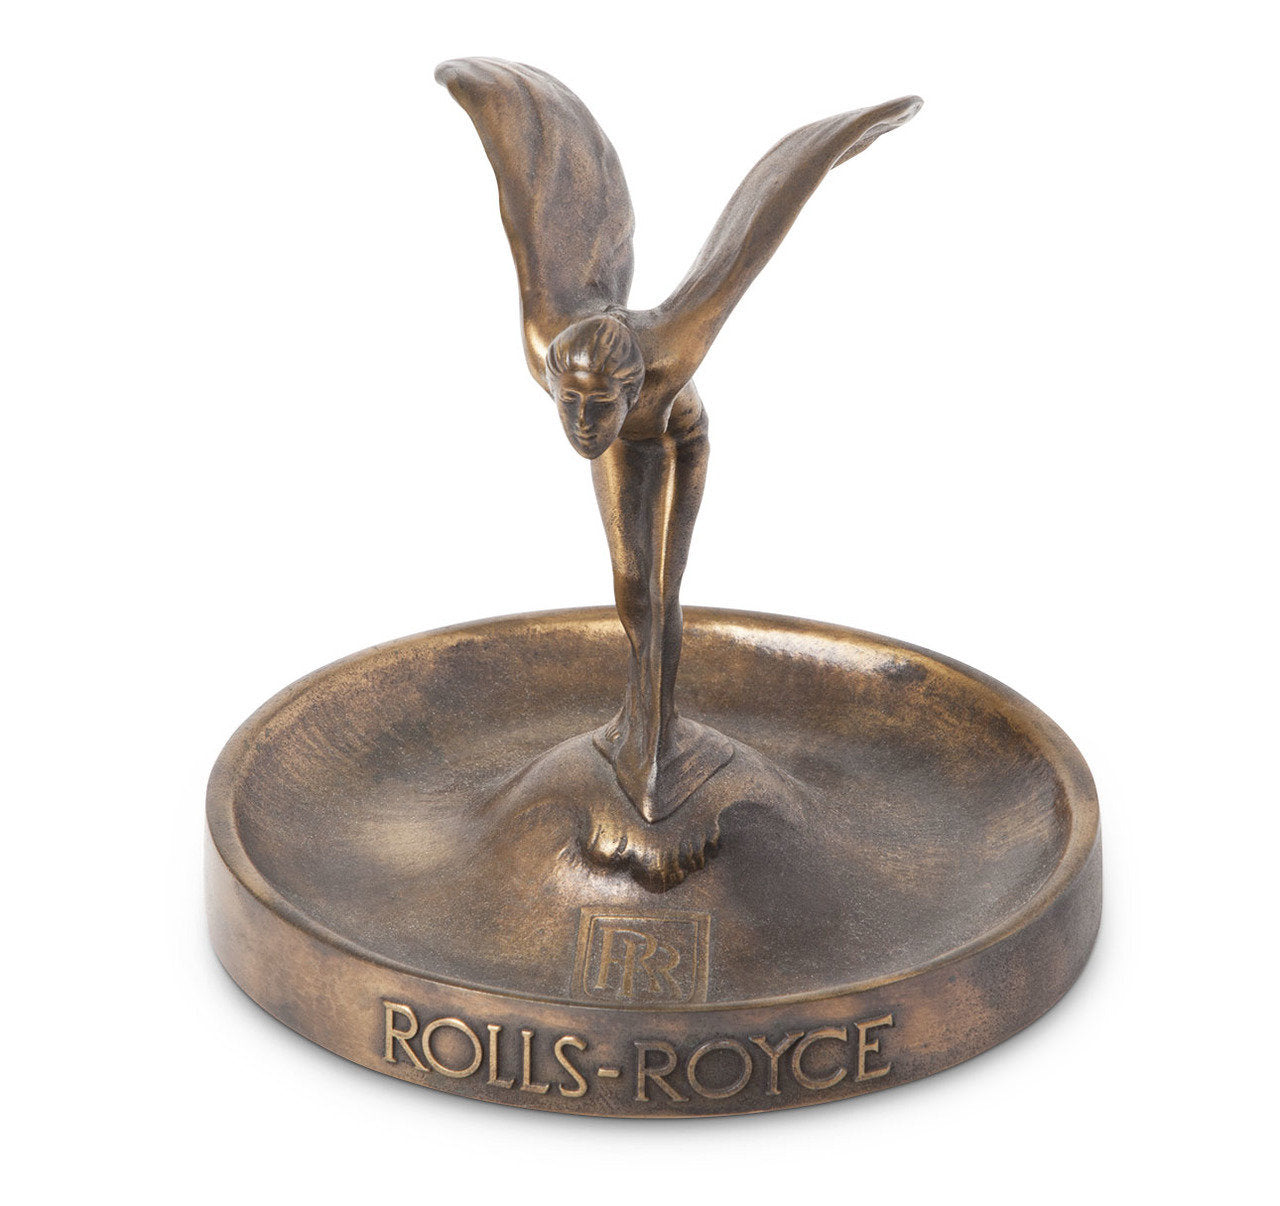 Vintage Rolls-Royce Owners Club Ashtray